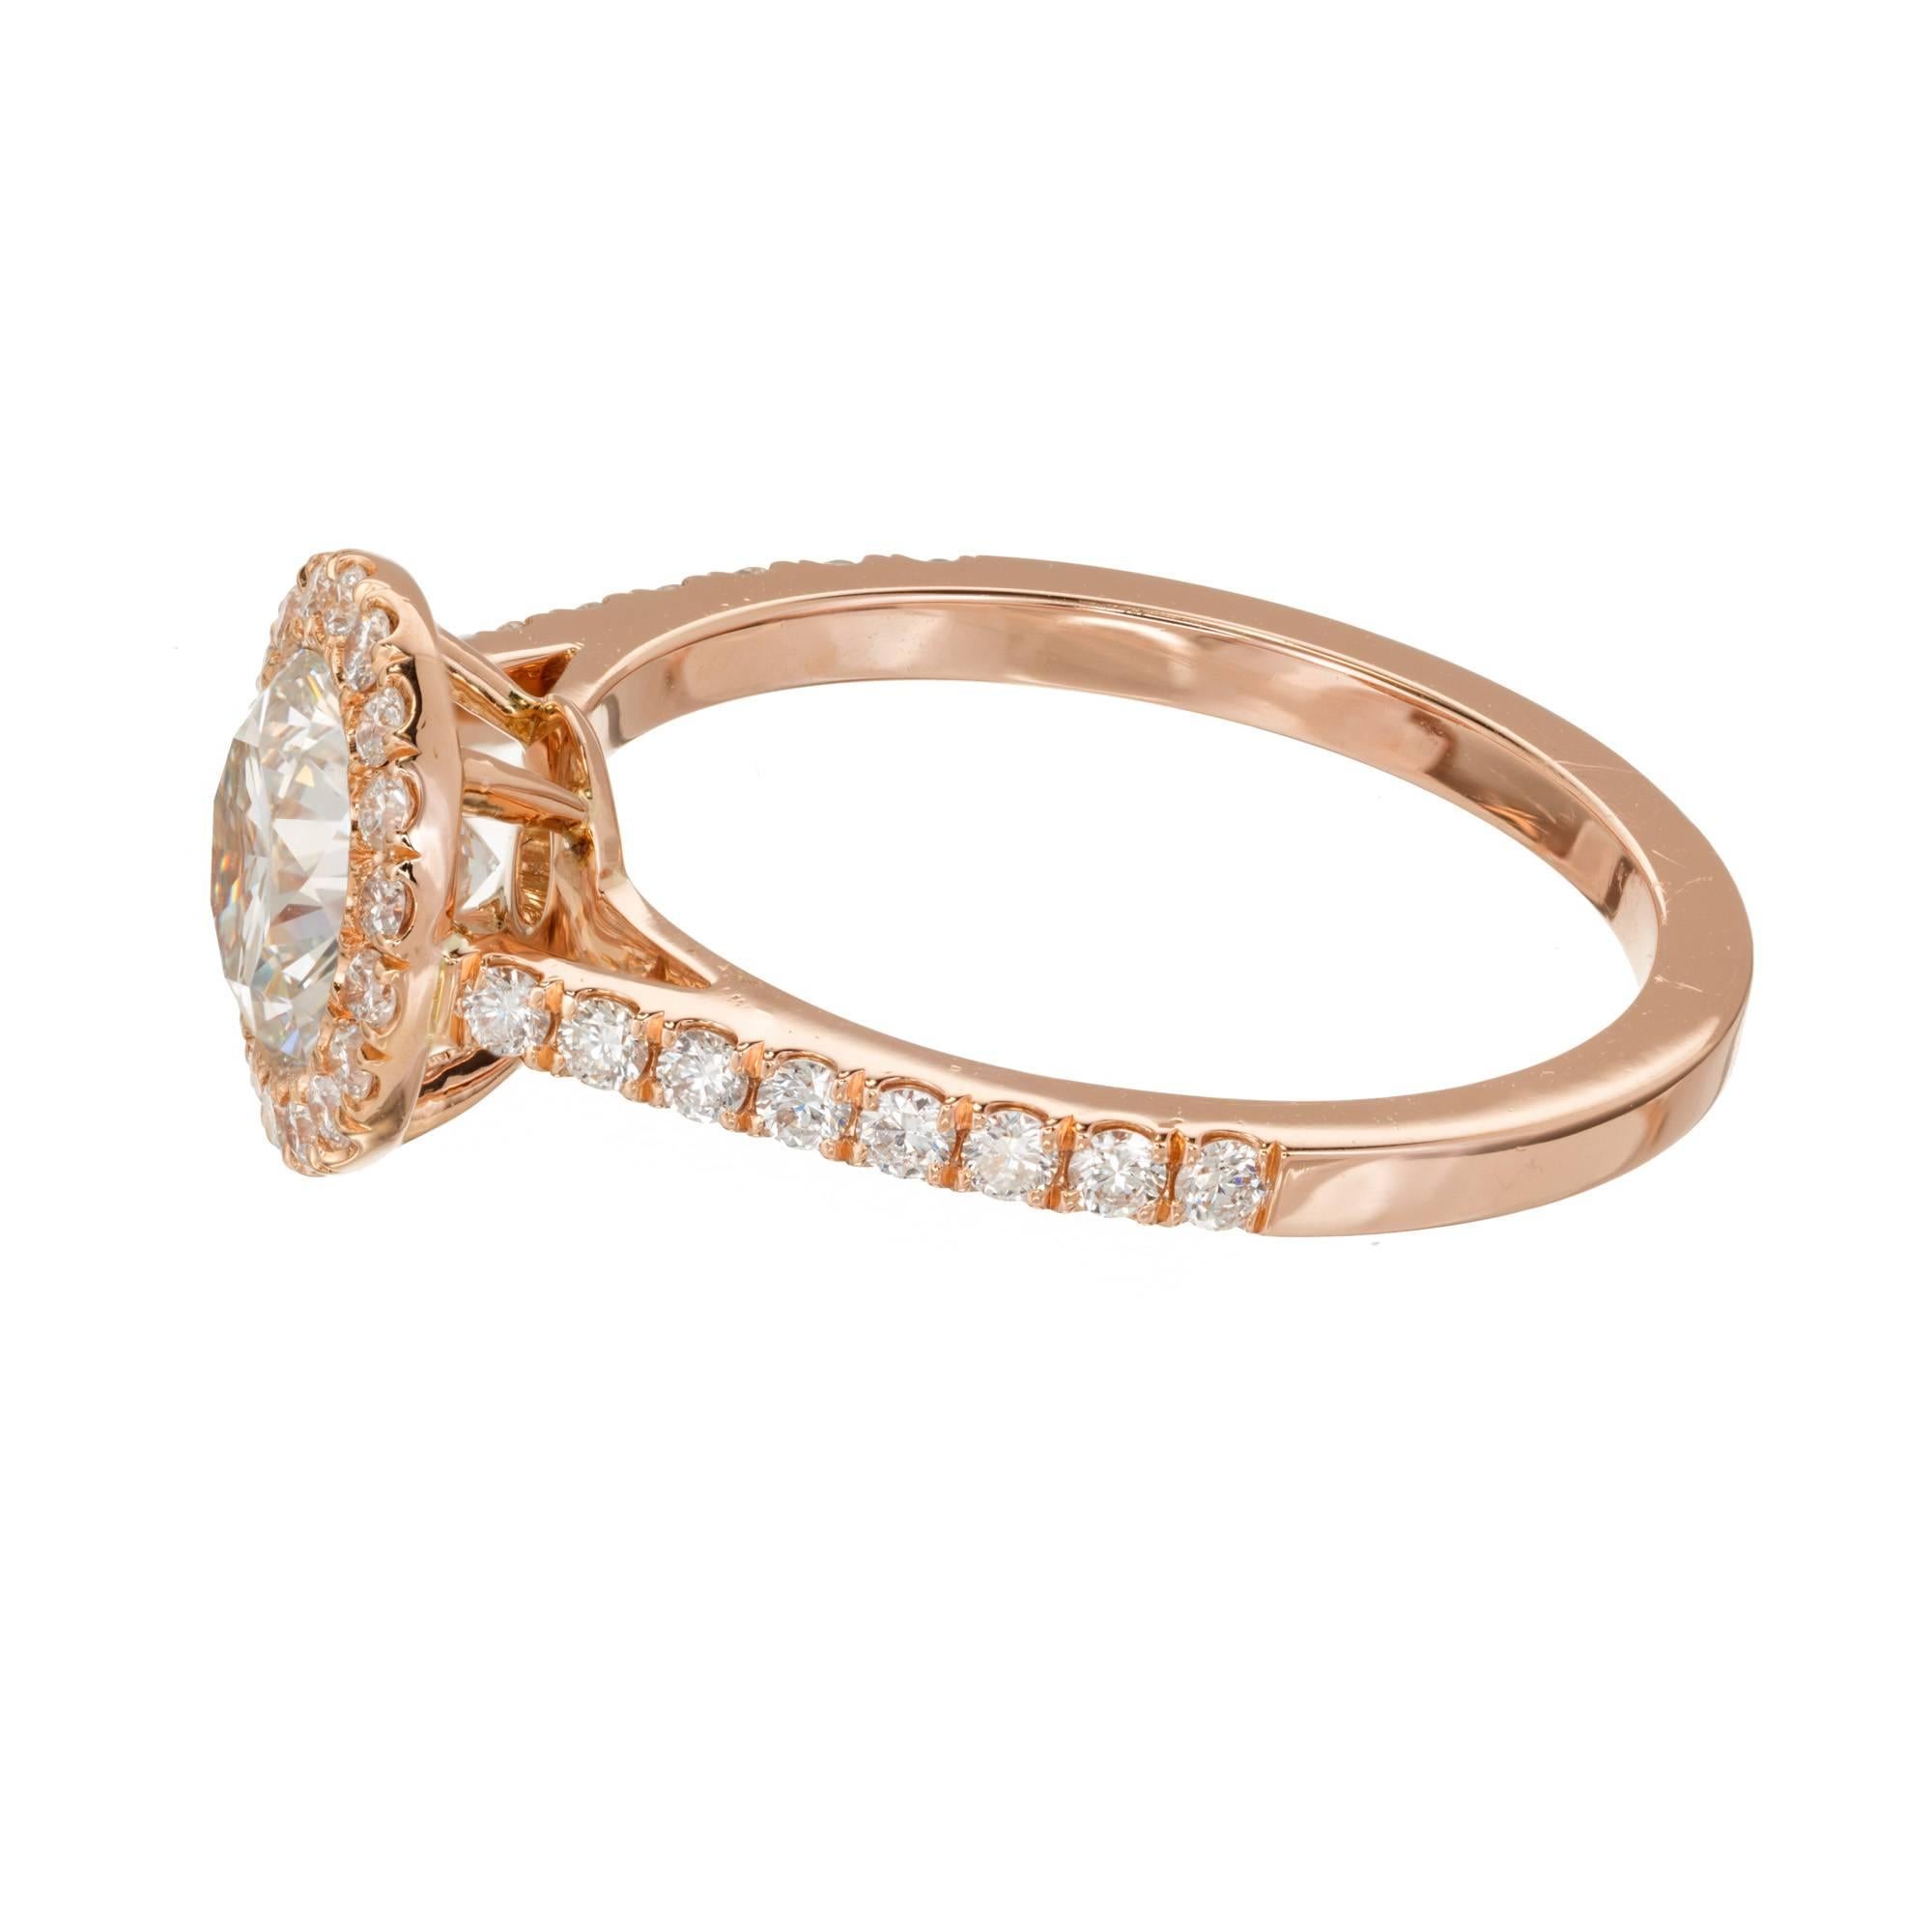 Peter Suchy Gia Certified 1.06 Carat Diamond Halo Rose Gold Engagement Ring For Sale 3